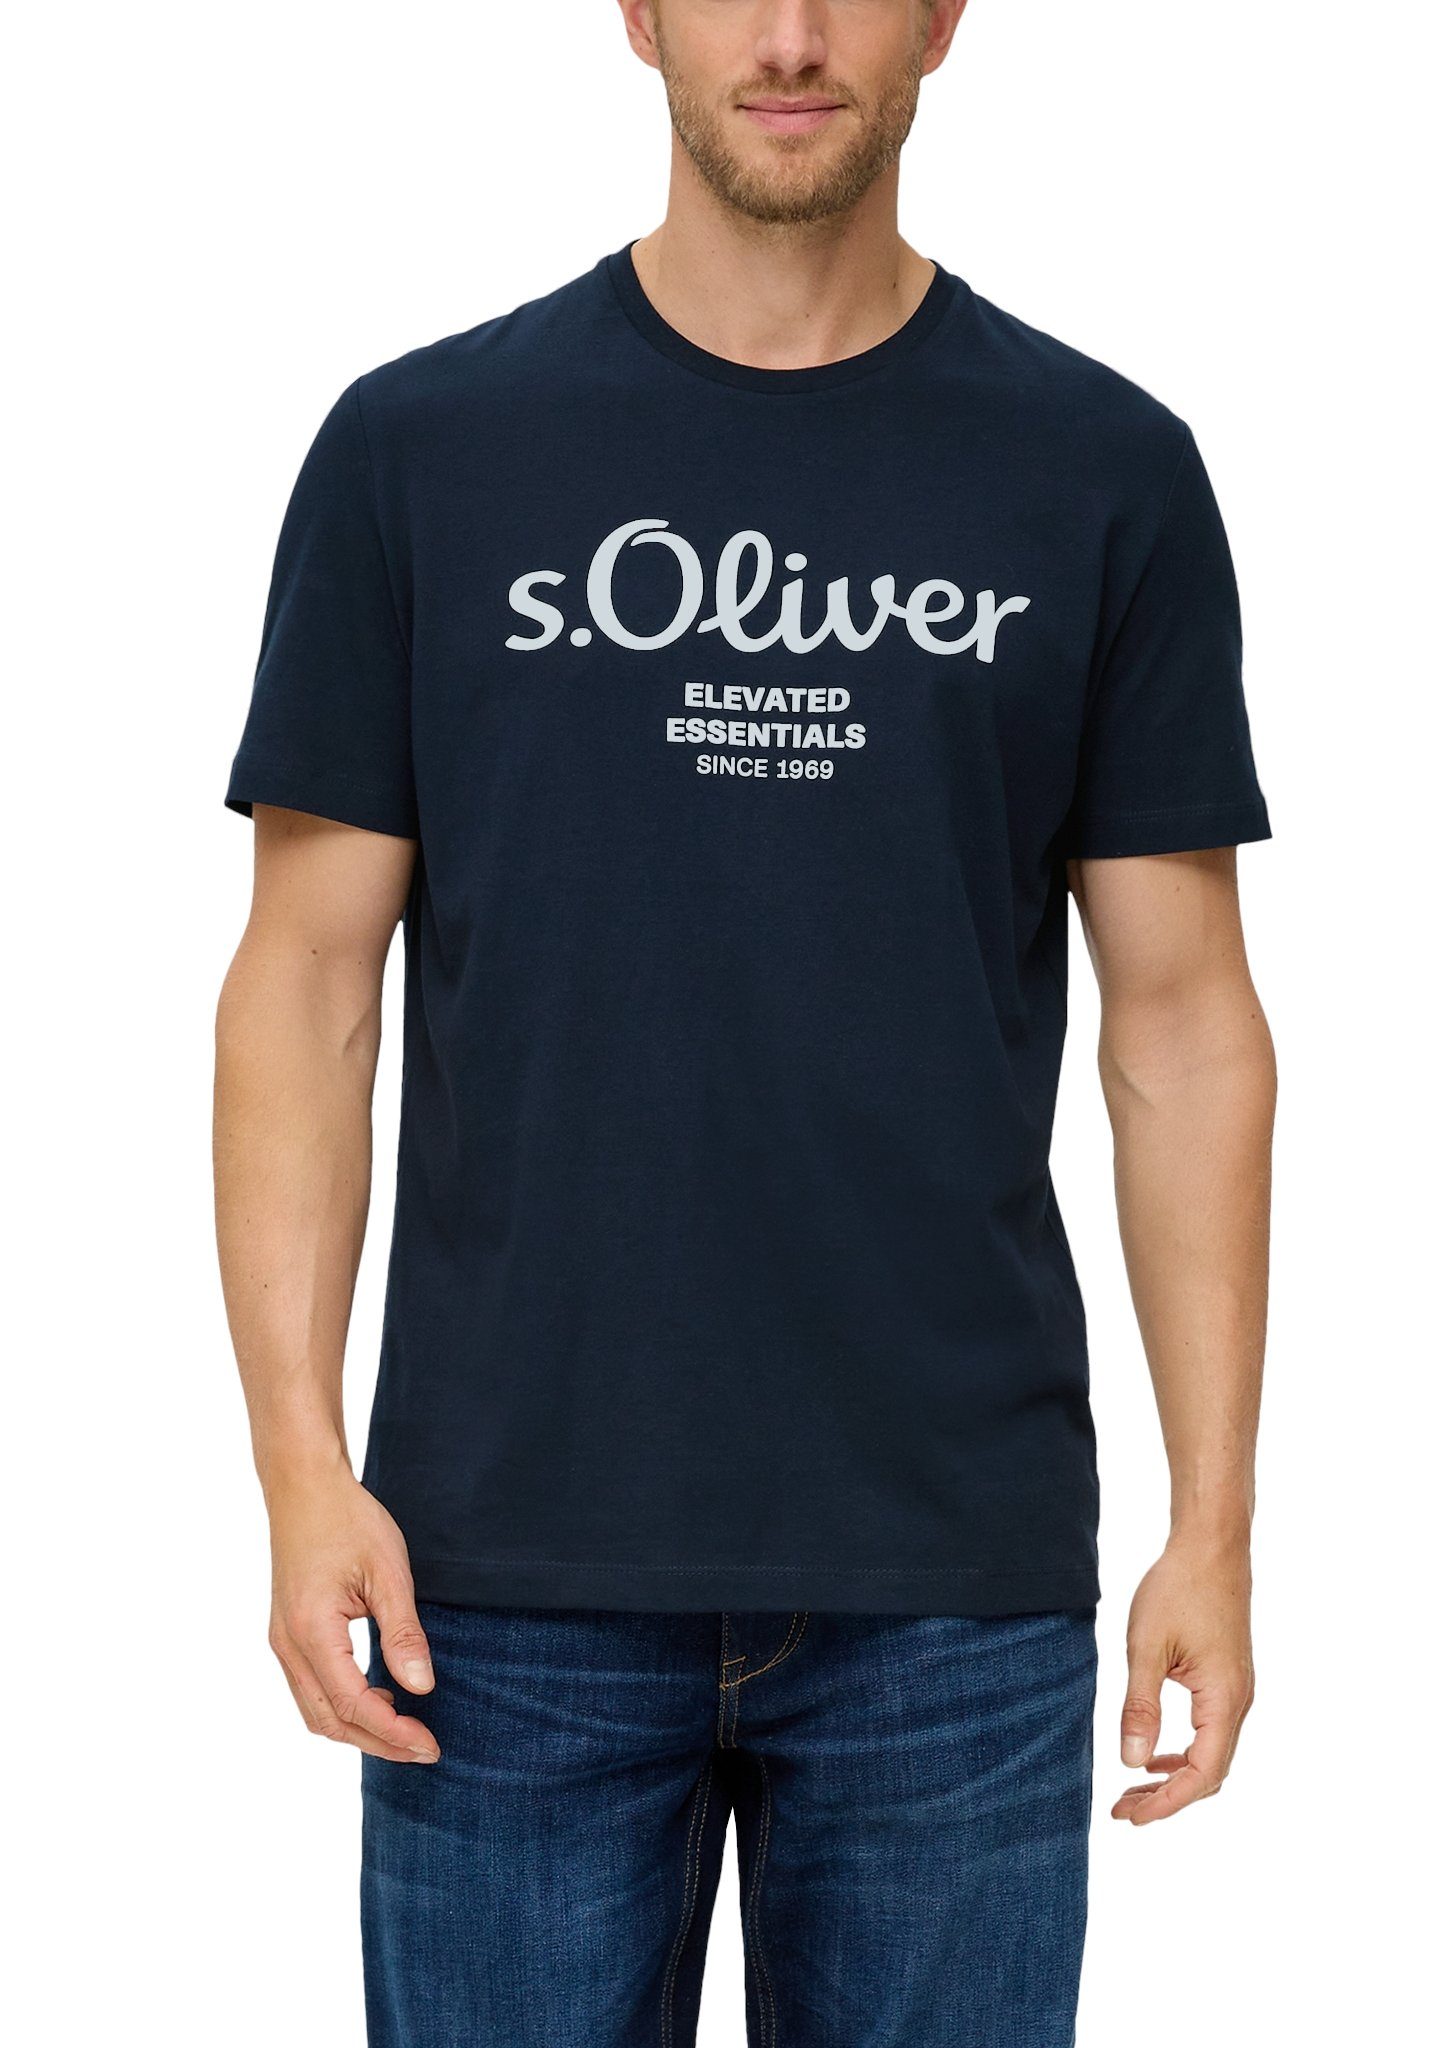 s.Oliver T-Shirt im sportiven blue Look